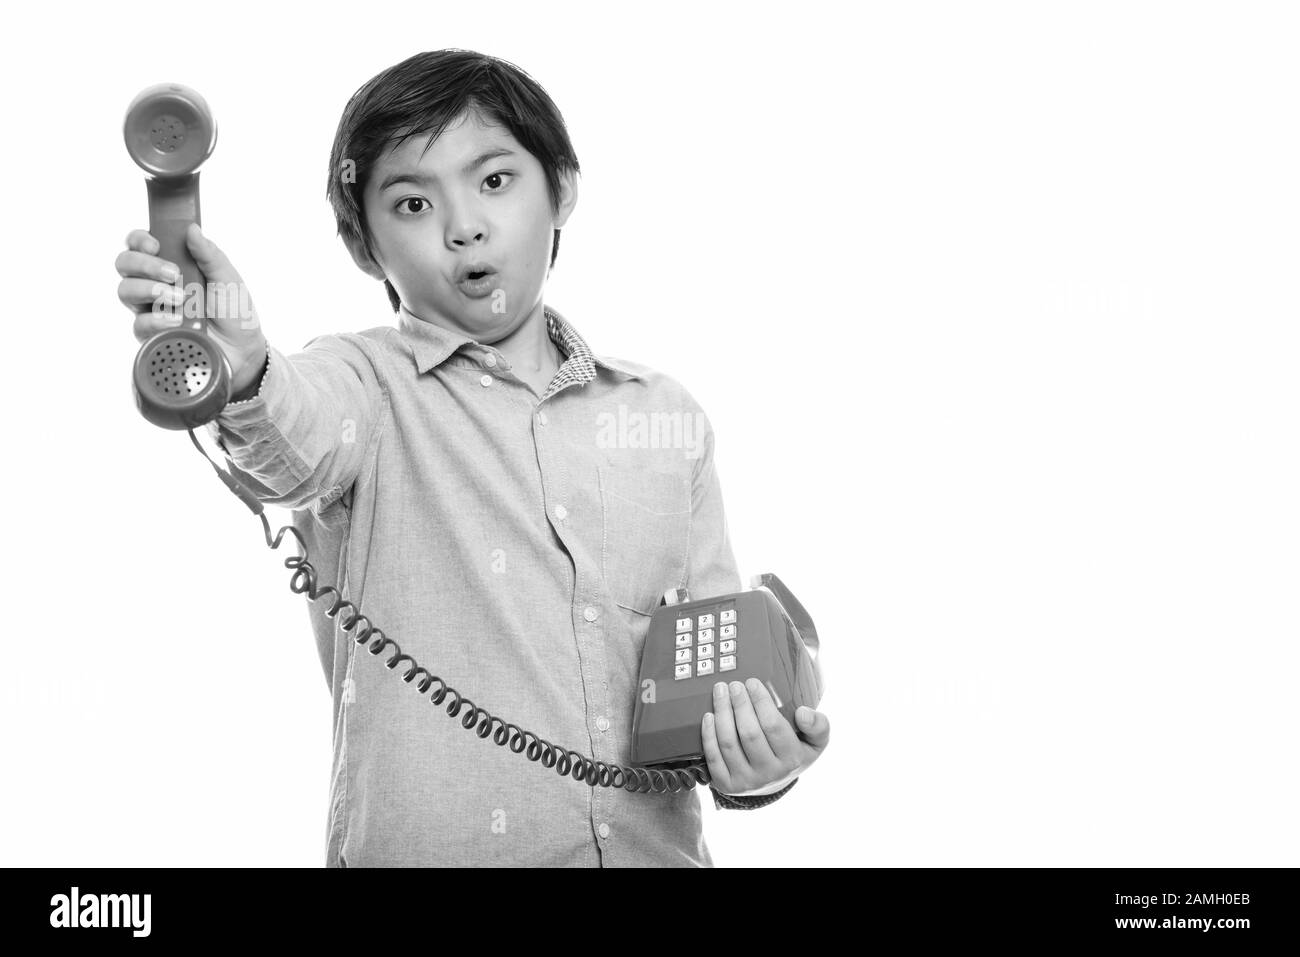 Studio shot of cute Japanese boy giving old telephone looking shocked Stock Photo